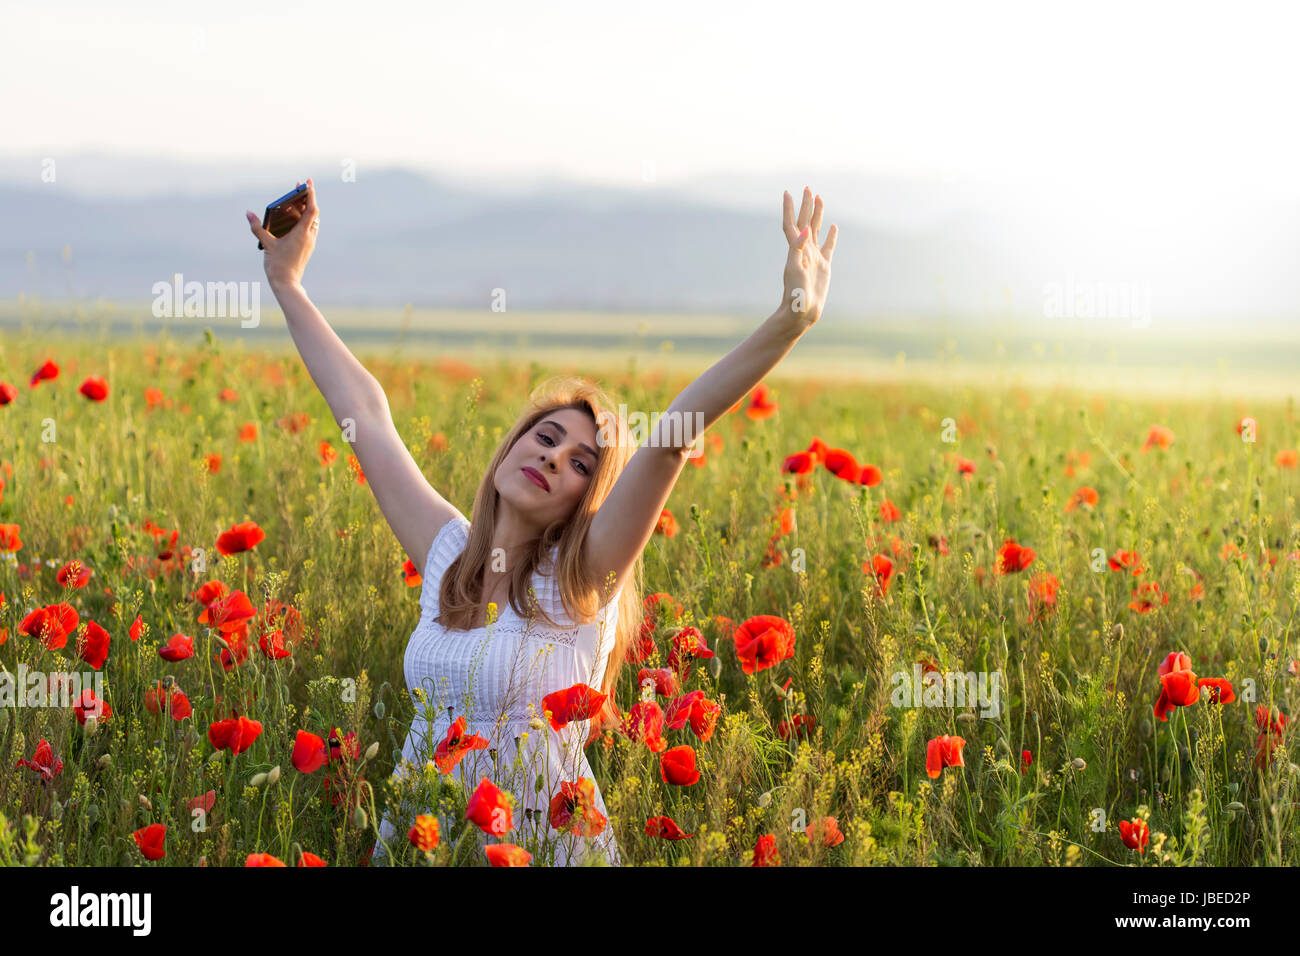 Young girl wearing white dress cloth standing in a poppy field with hands up with phone Stock Photo